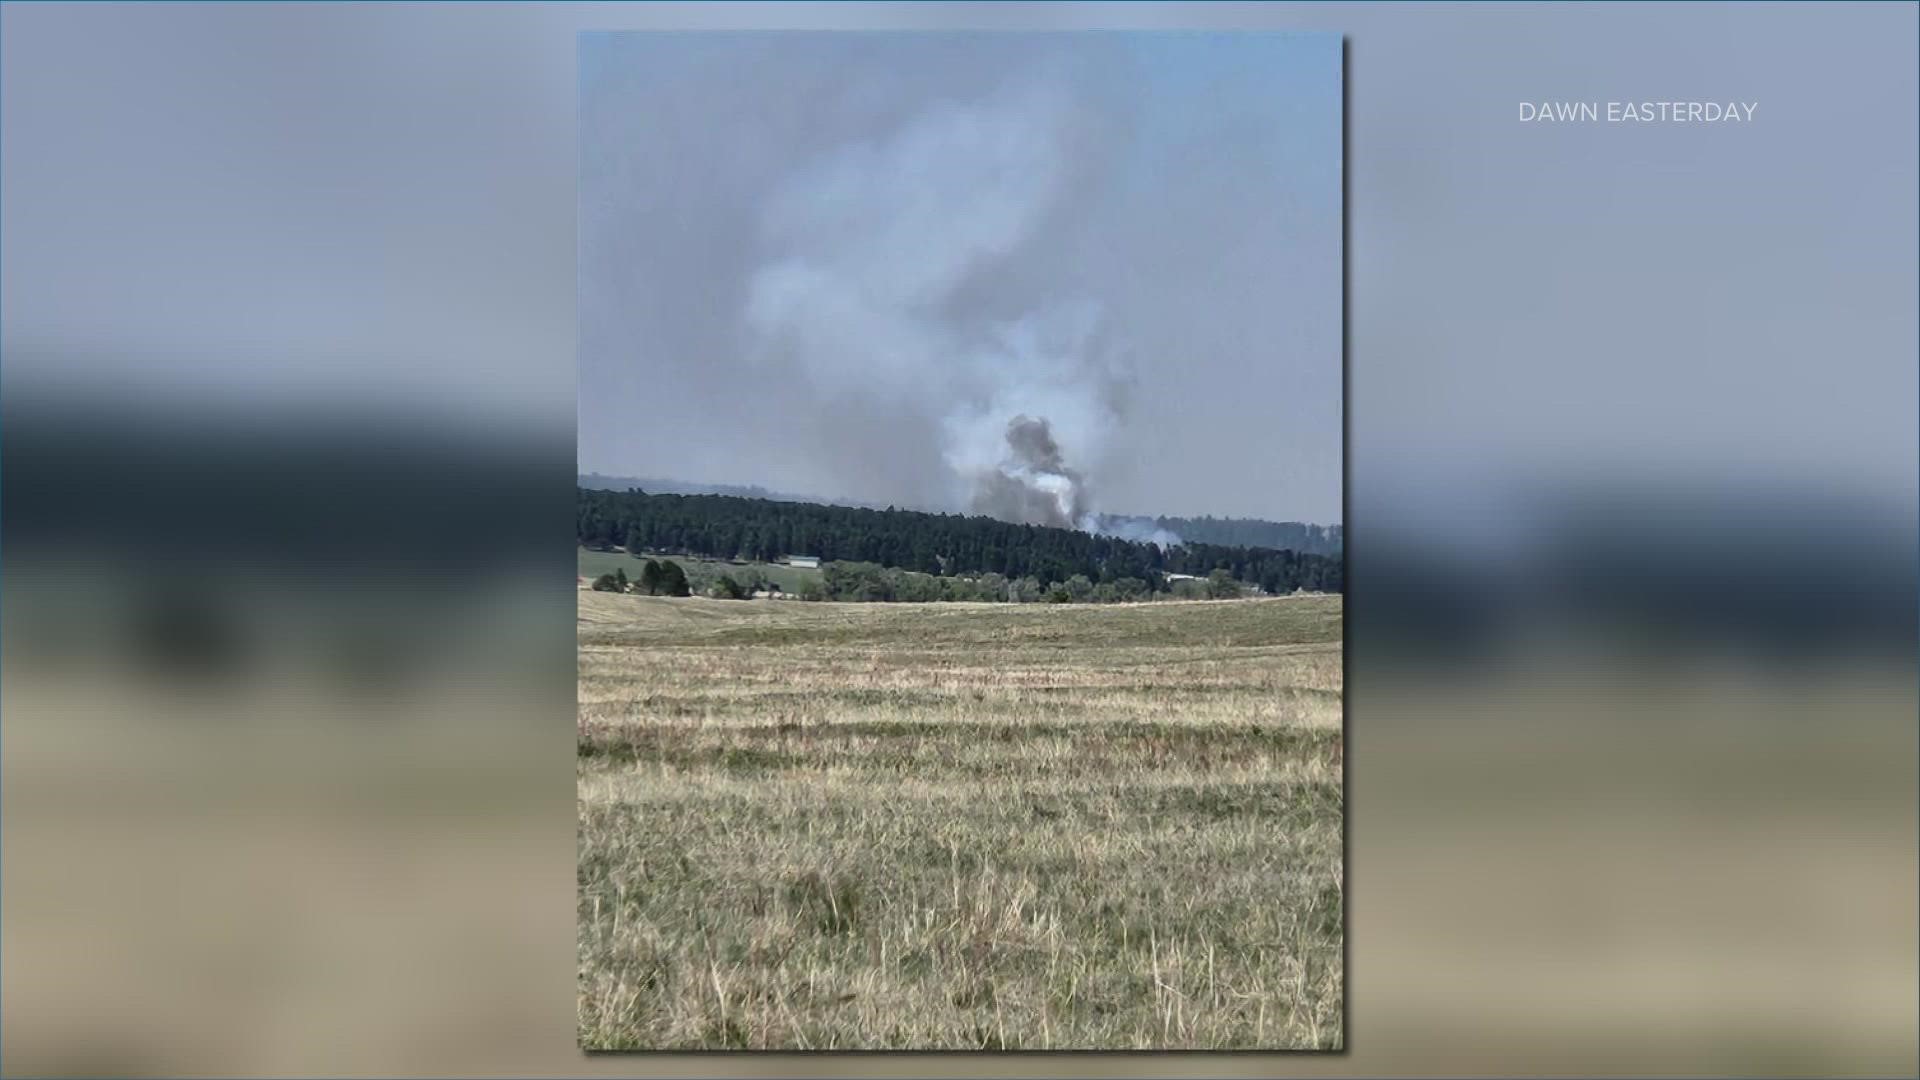 Kids at a camp in Elbert County had to evacuate Wednesday because of a wildfire. It started in the afternoon south of Elbert, near county road 82 and Elbert Road.